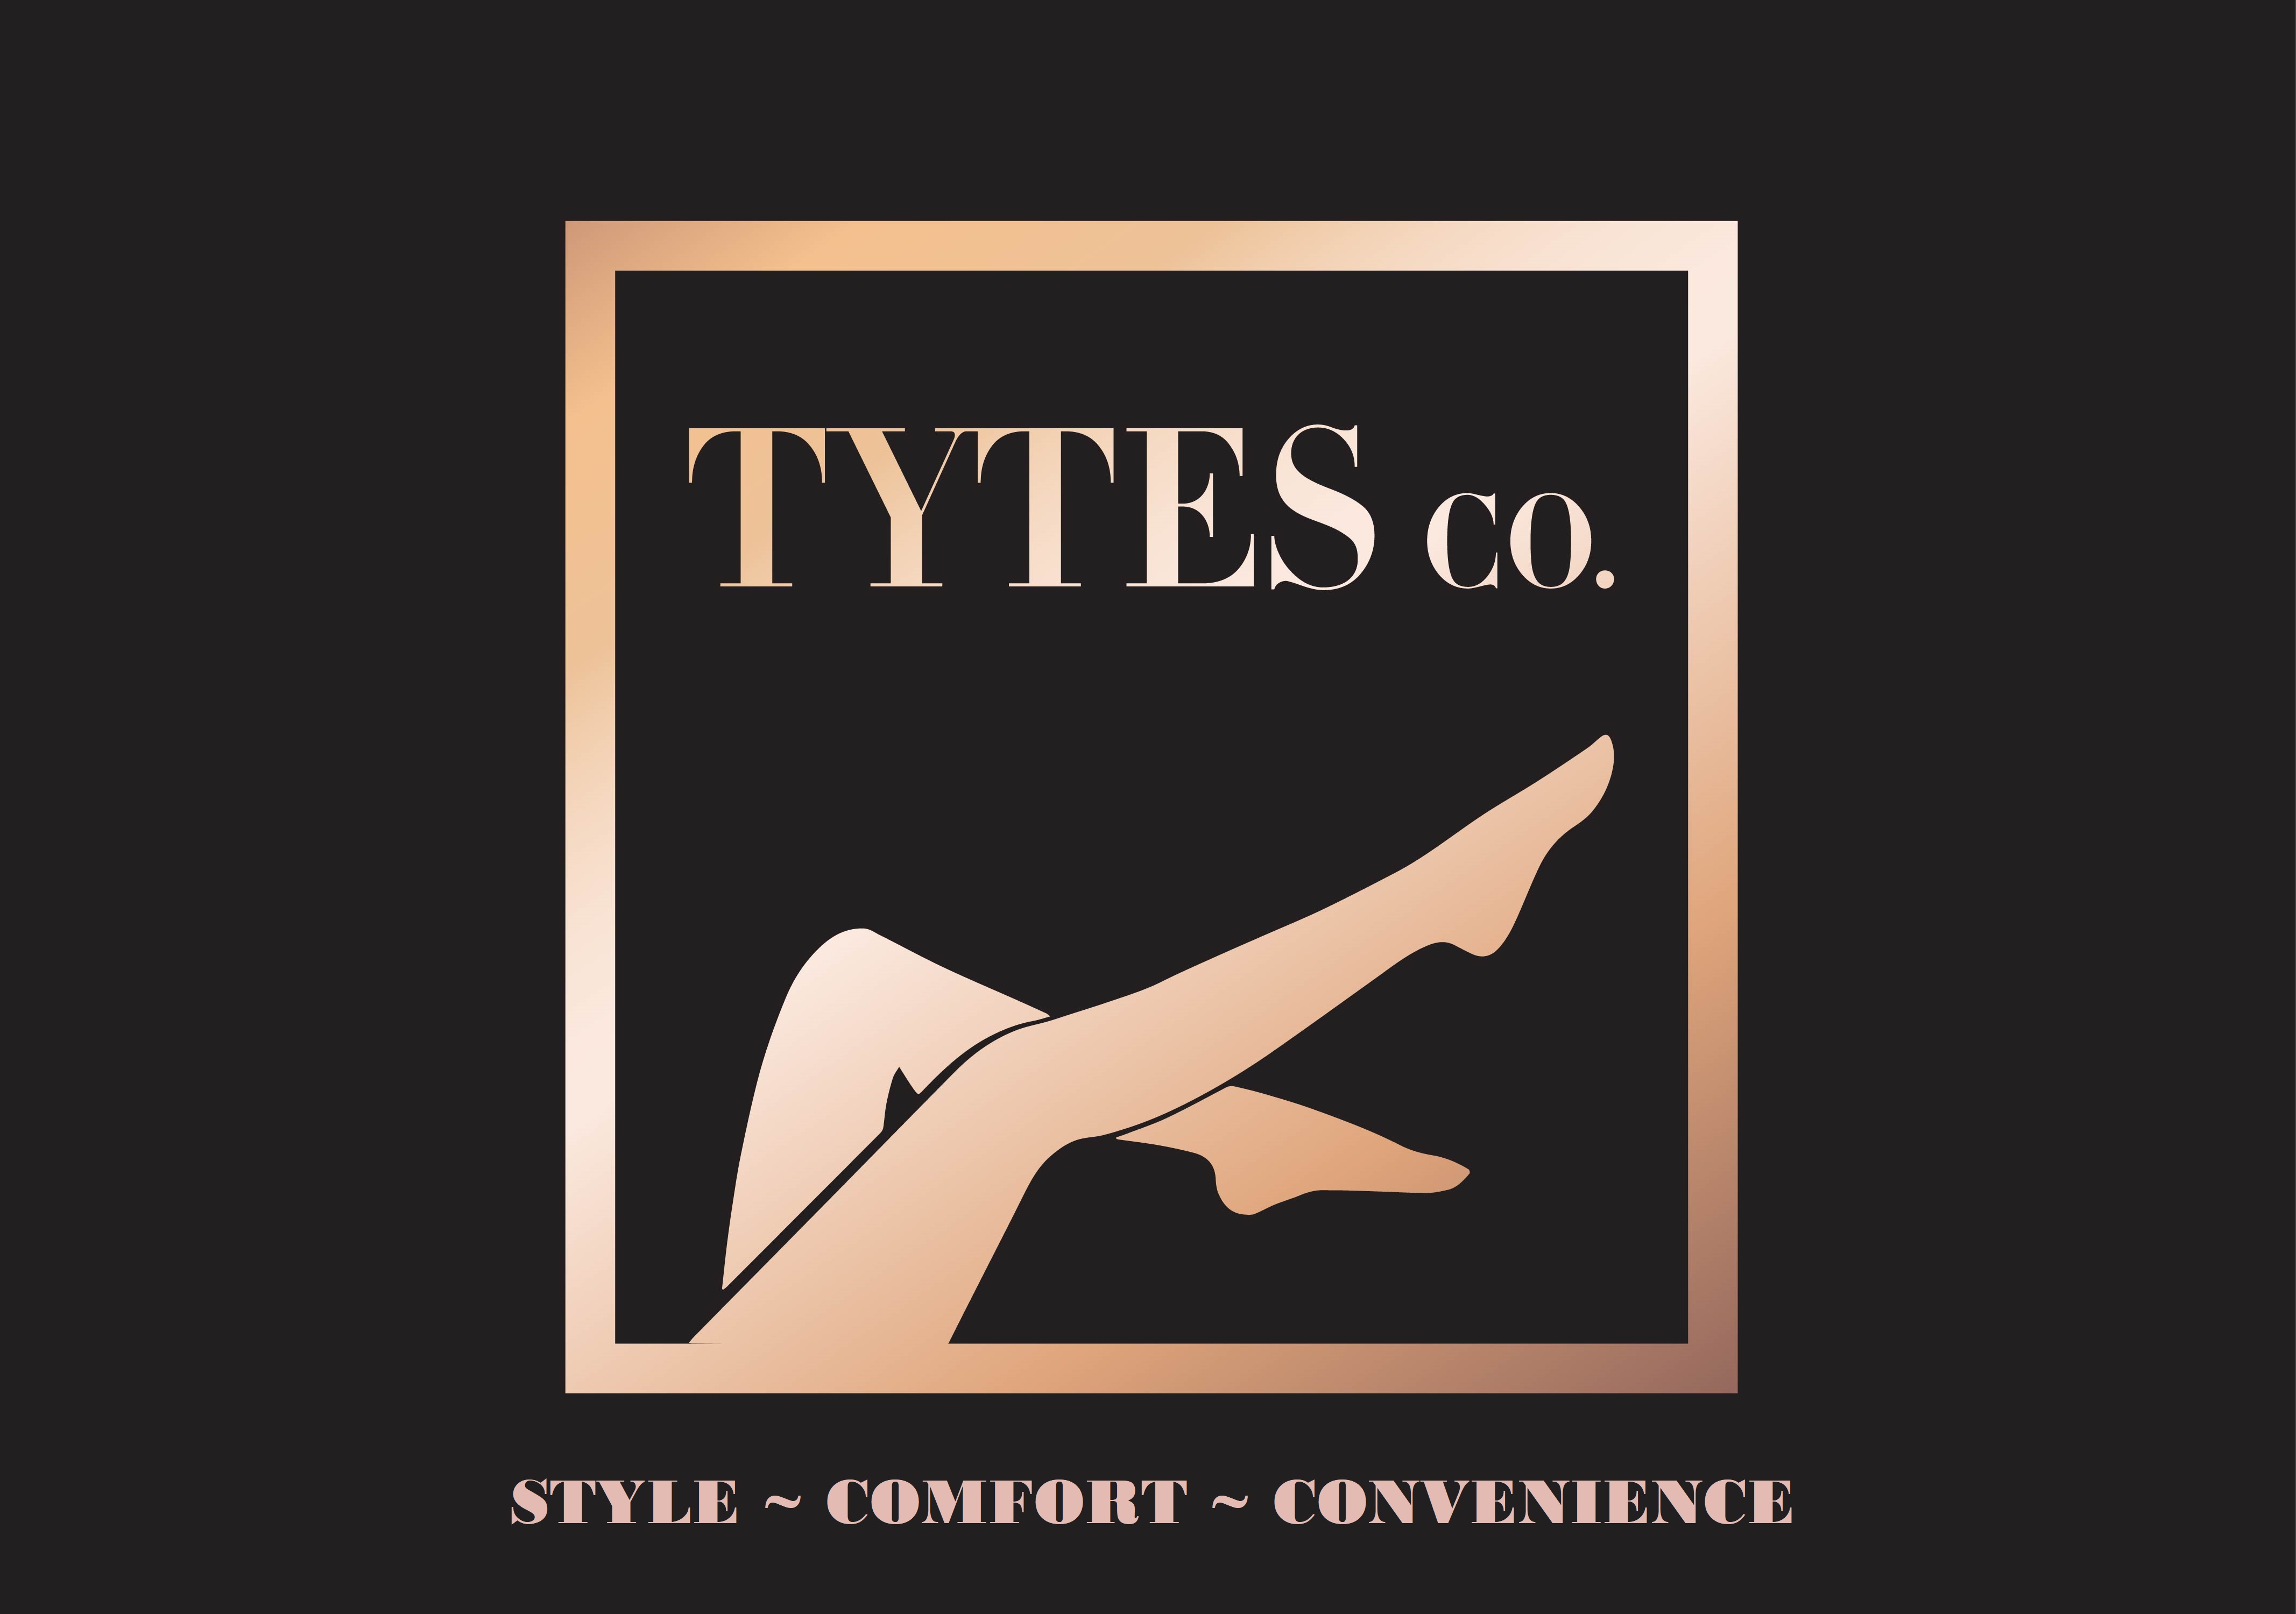 The logo or business face of "TYTES COMPANY"